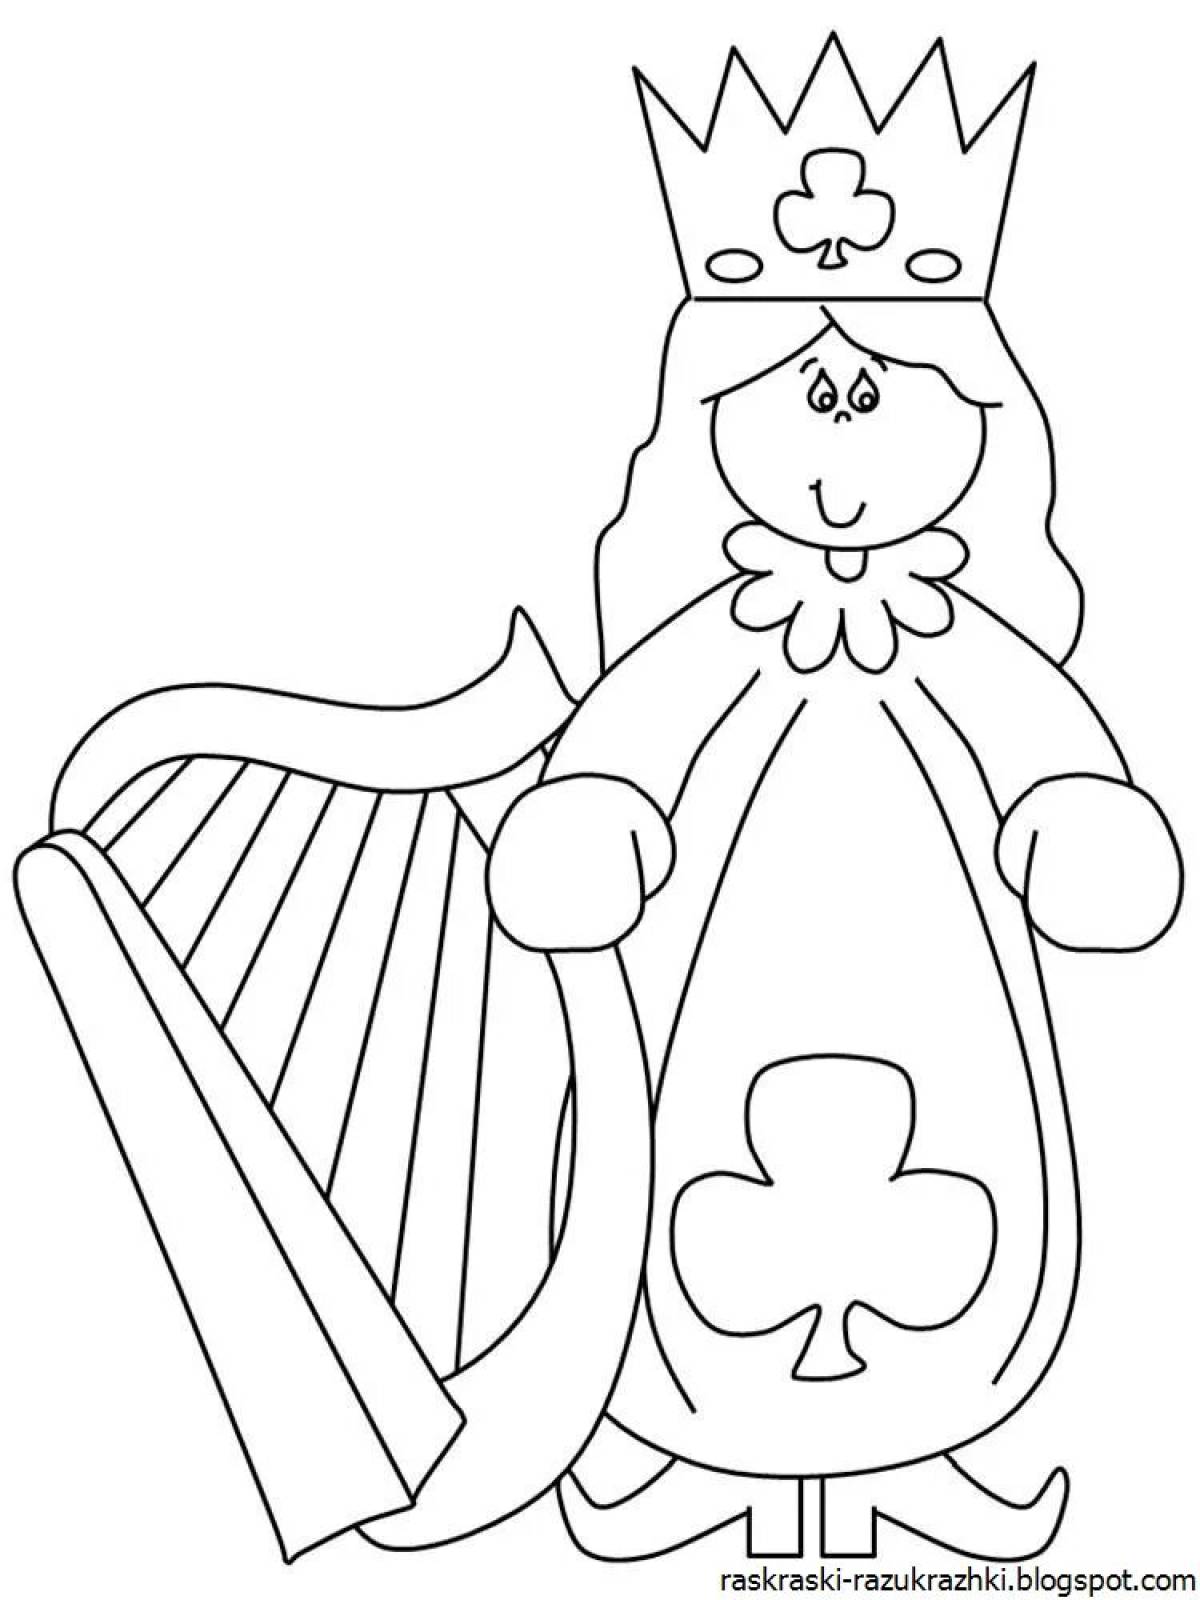 Fancy queen coloring pages for kids